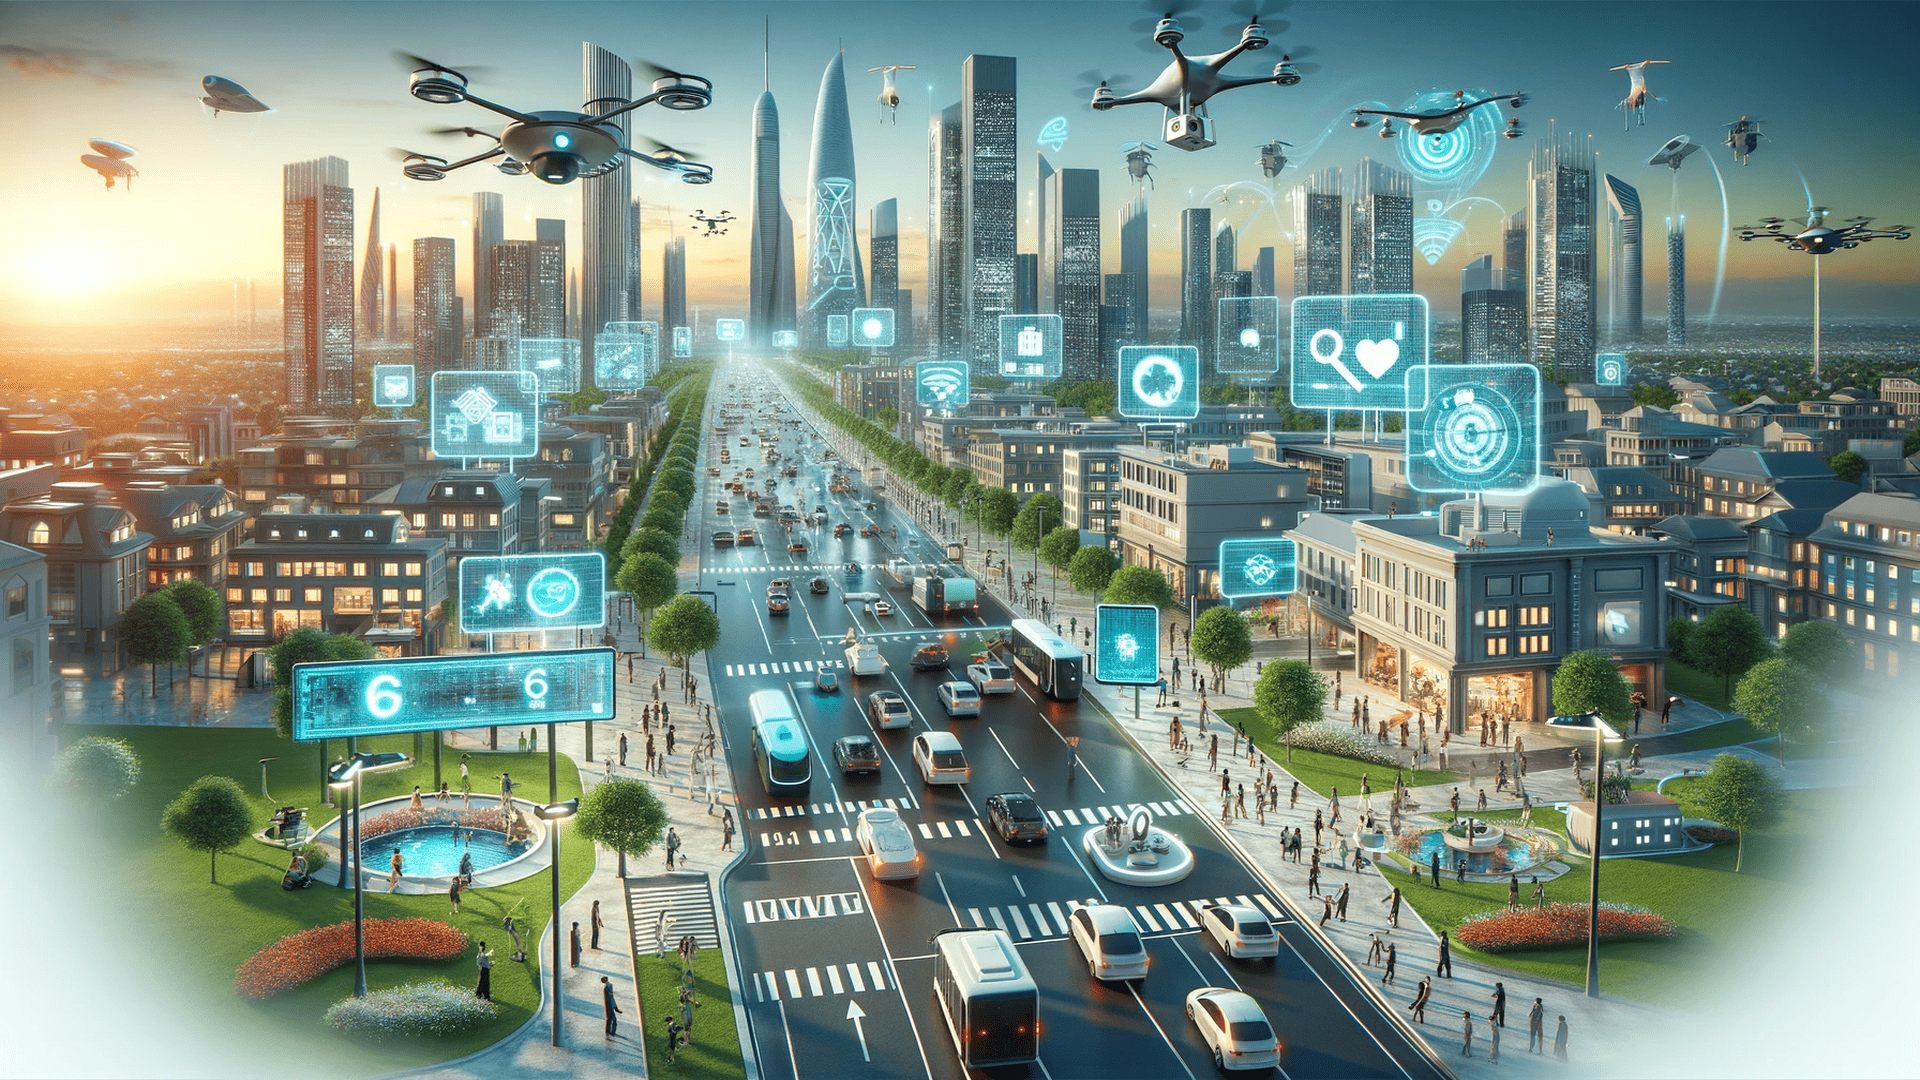 Illustrated image of an interconnected city 